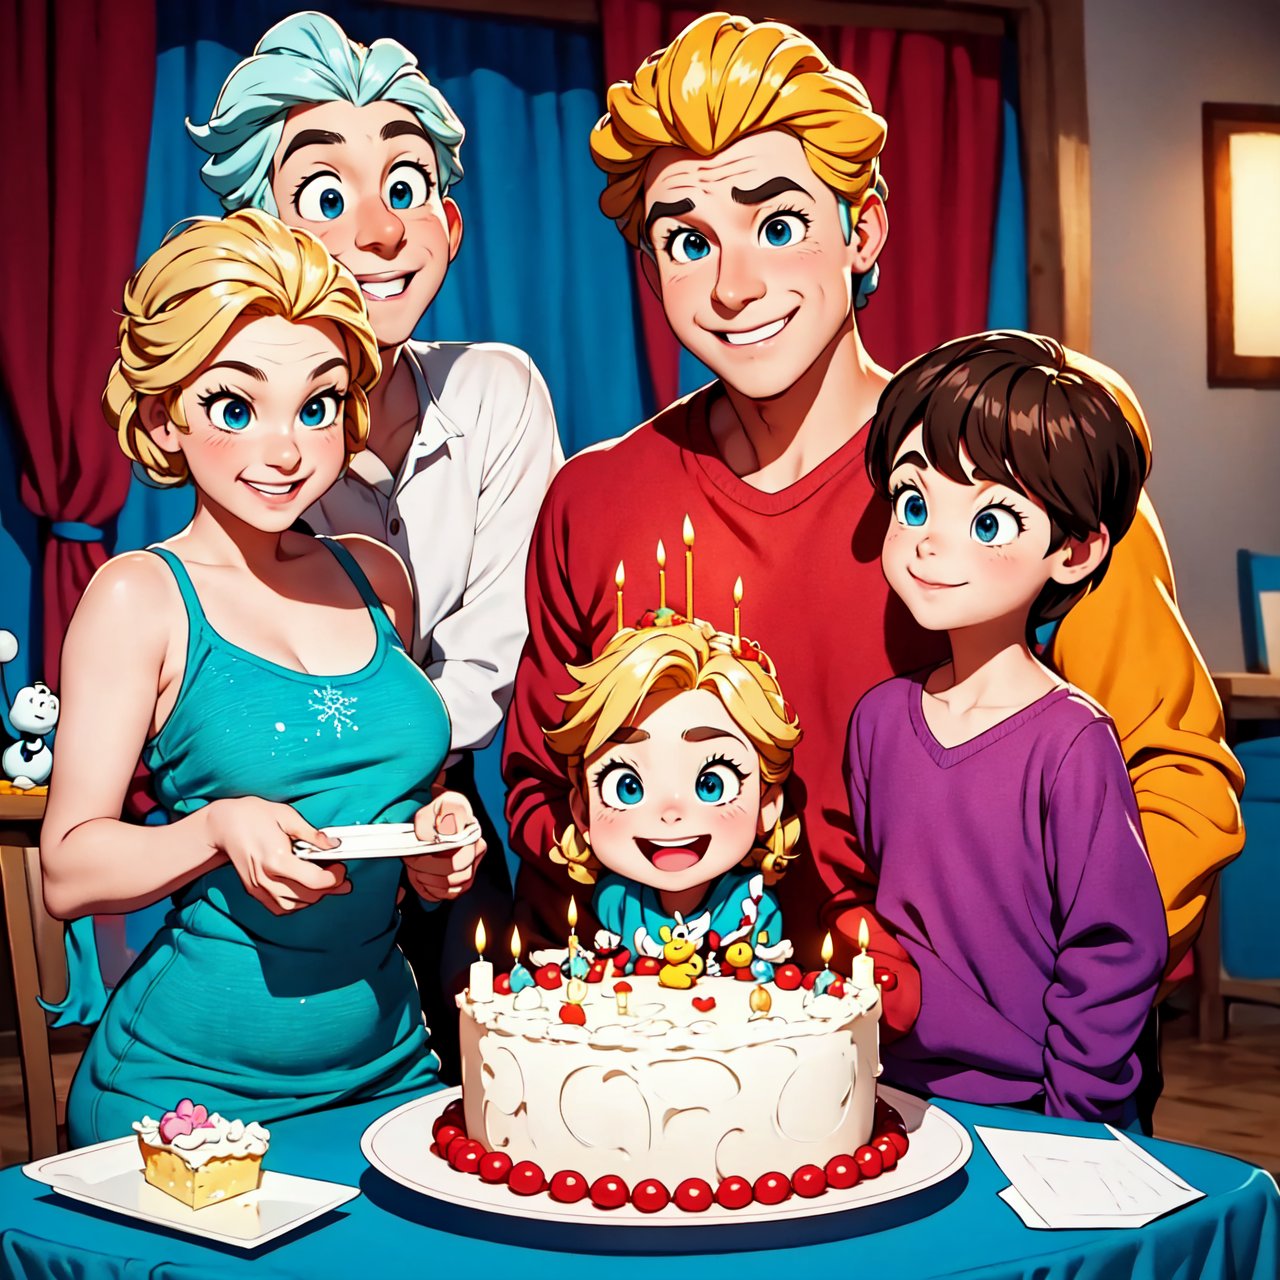 A large happy children's birthday party scene with 4-6 children, cake, candles and Elsa from Disney's Frozen standing in the background, celebration style, detailed depiction of the facial structure of the characters, bright overall colors, candles on the cake, by Charles M. Schulz